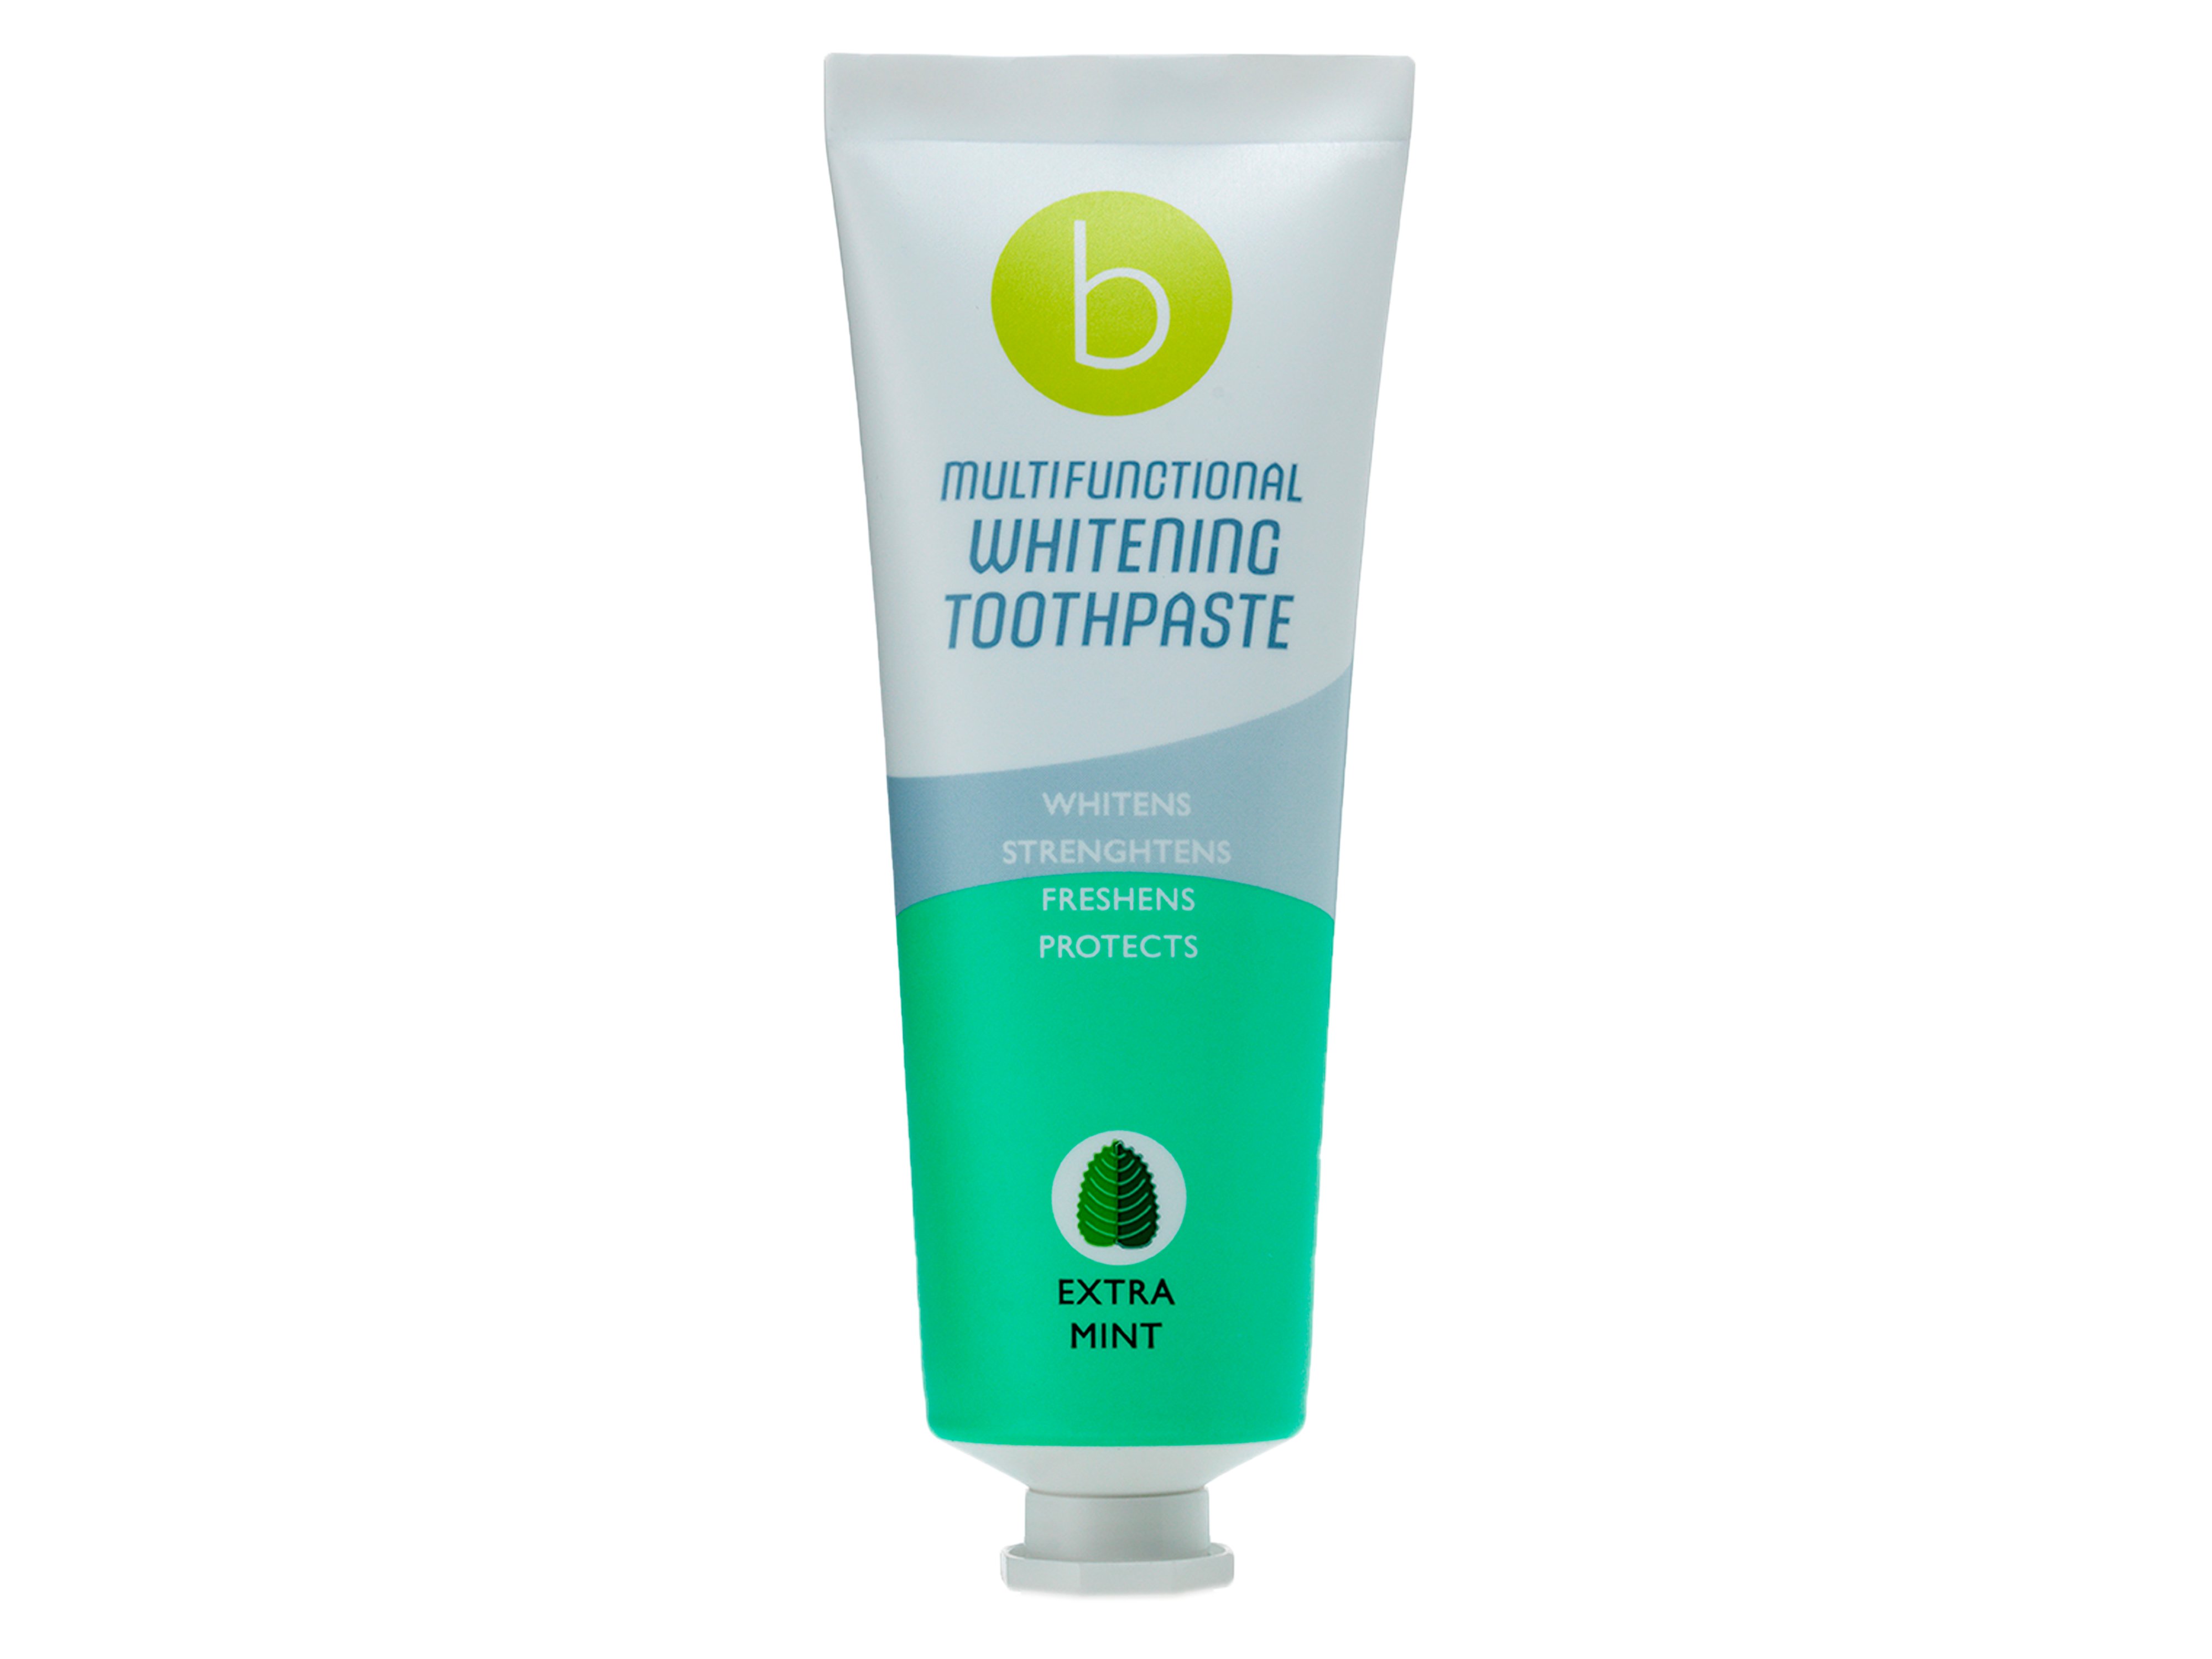 Beconfident Multifunctional  Whitening Toothpaste, extra mint, 75 ml